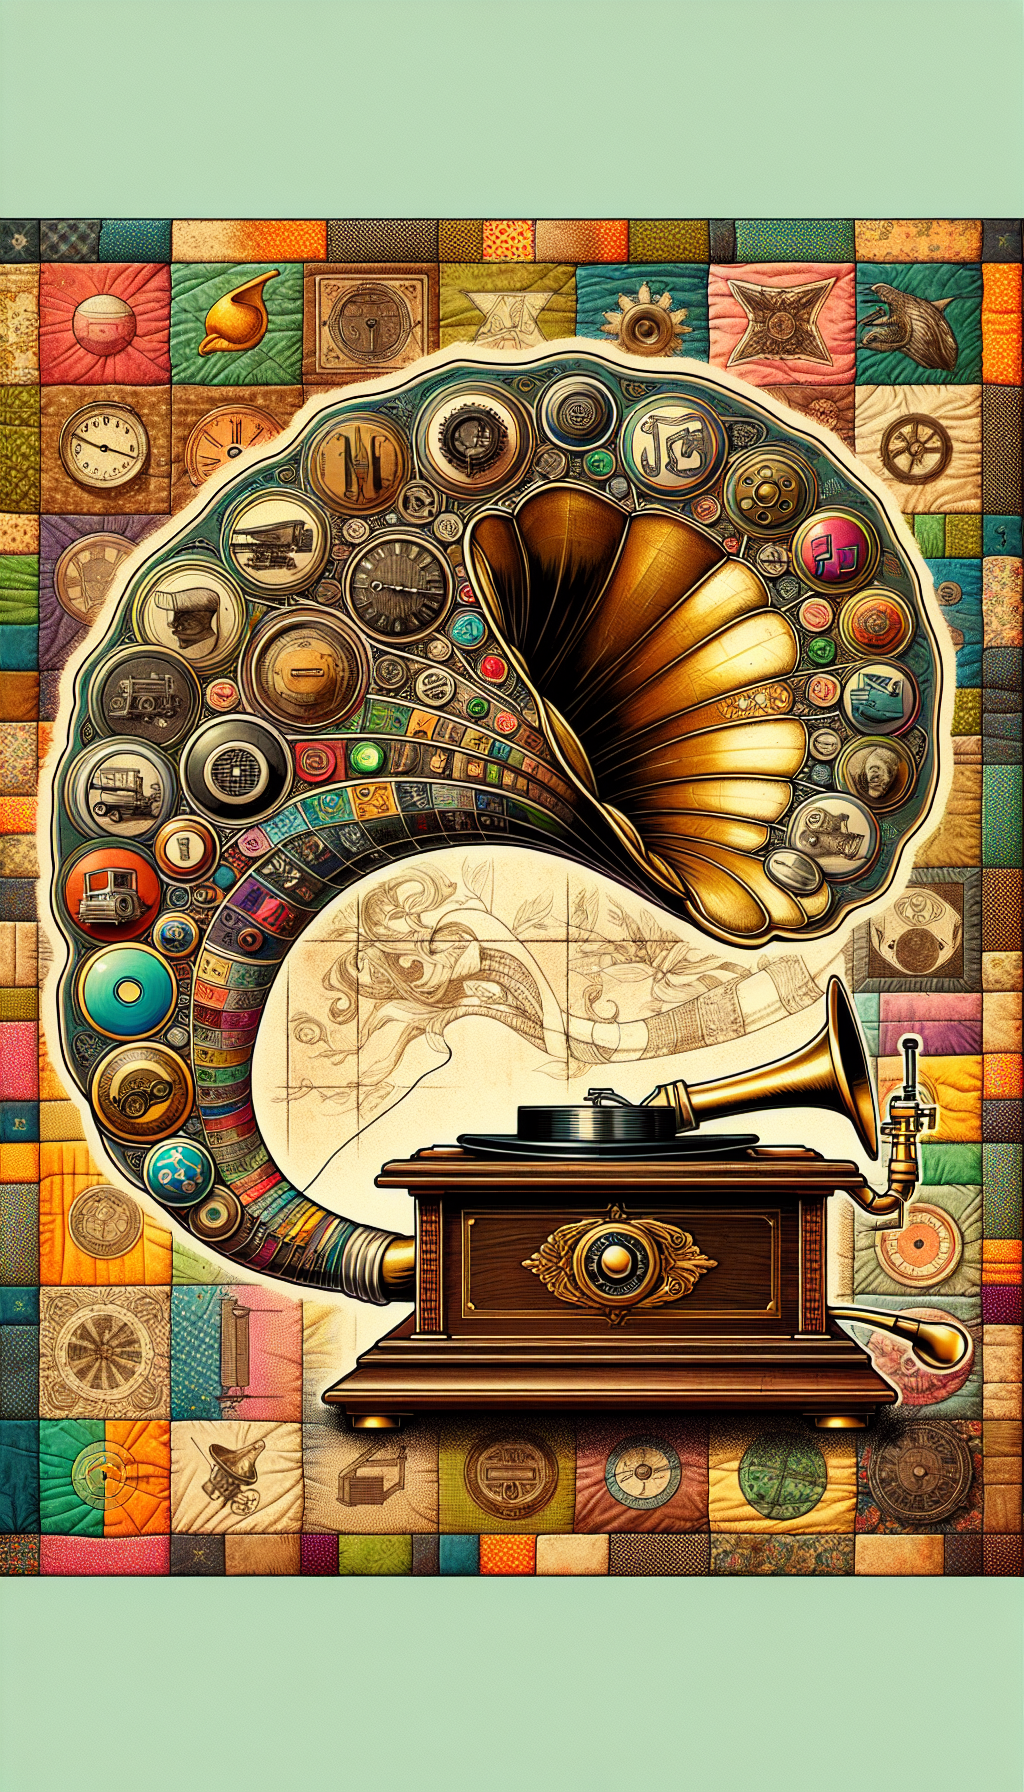 An intricate steampunk-inspired victrola record player with its horn unraveling into a spiraling historical timeline, connecting icons of different eras to their corresponding model and brand badges, each linked to a tapestry of provenance tales. The background is patchwork of sepia-toned and vibrant vignettes, symbolizing the fluctuating value of antiques in a whimsical past-meets-present motif.